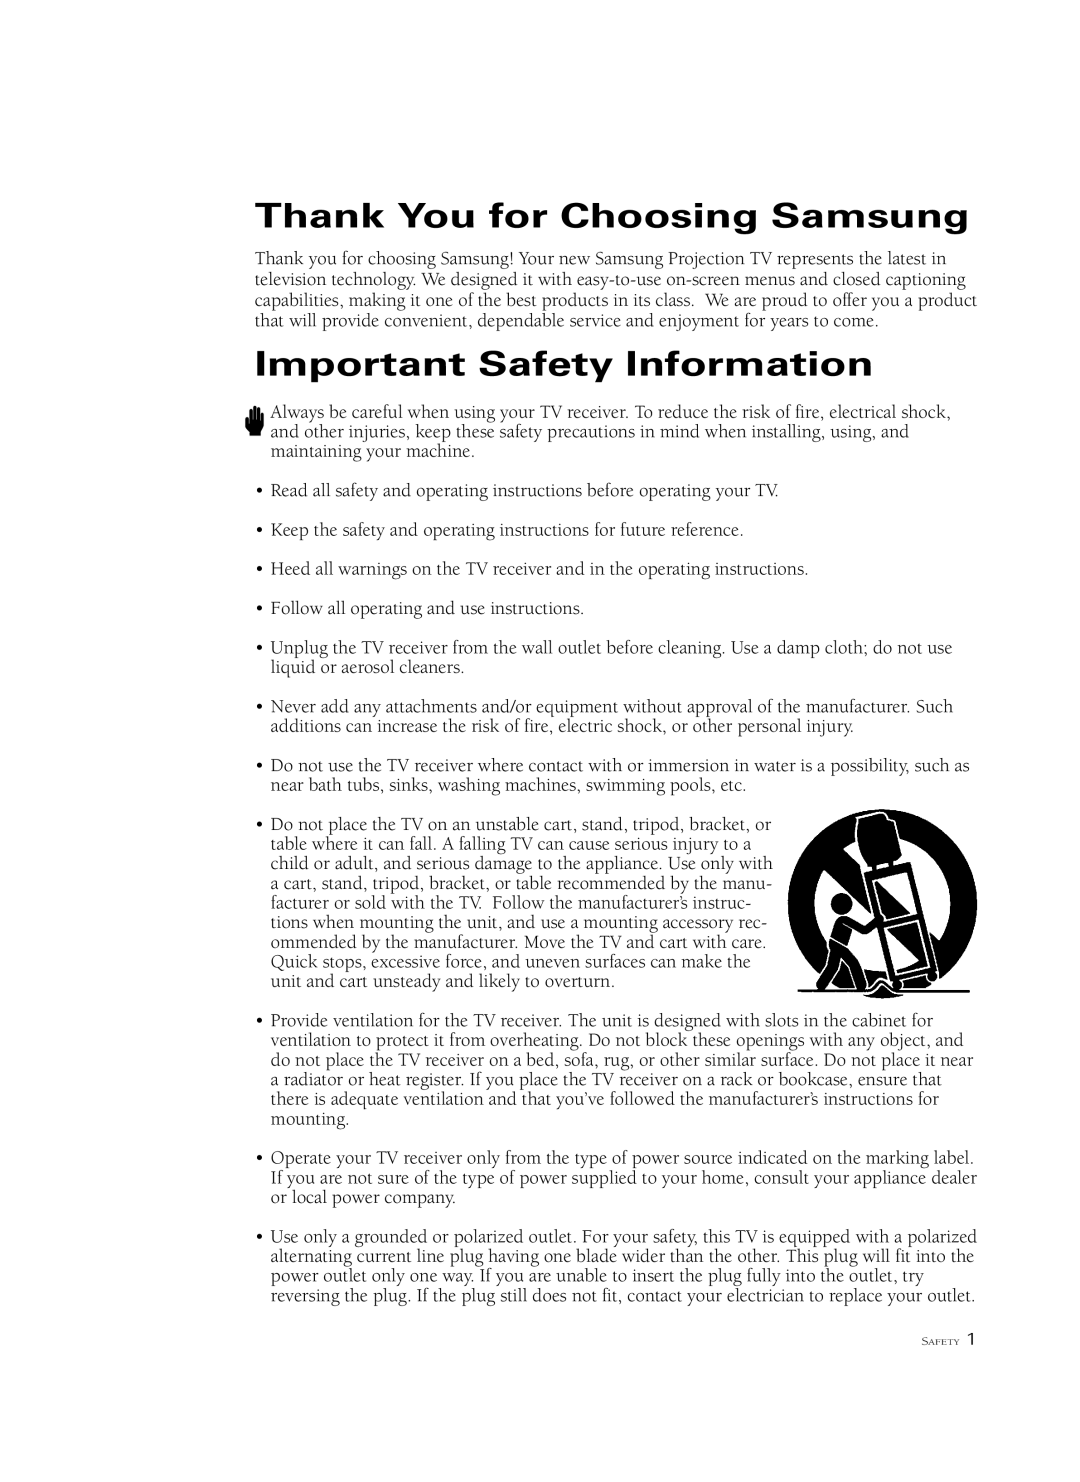 Samsung HCL 552W, HCM6525W, HCL 652W, HCL 473W, HCL 6515W manual Thank You for Choosing Samsung, Important Safety Information 